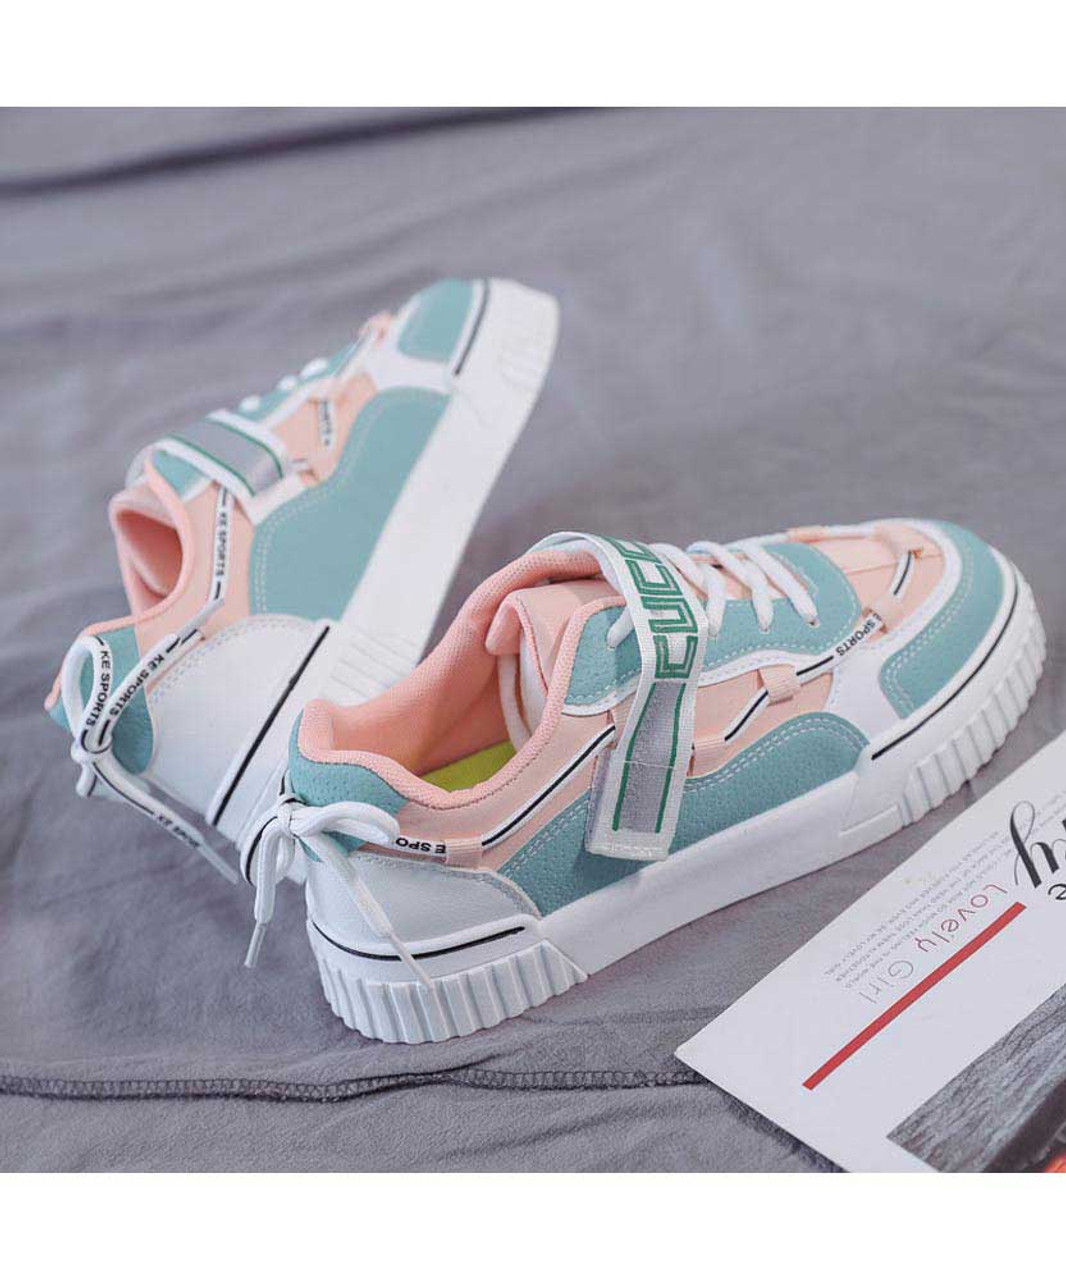 Green mixed color shoe sneaker with rear lace | Womens sneakers shoes ...